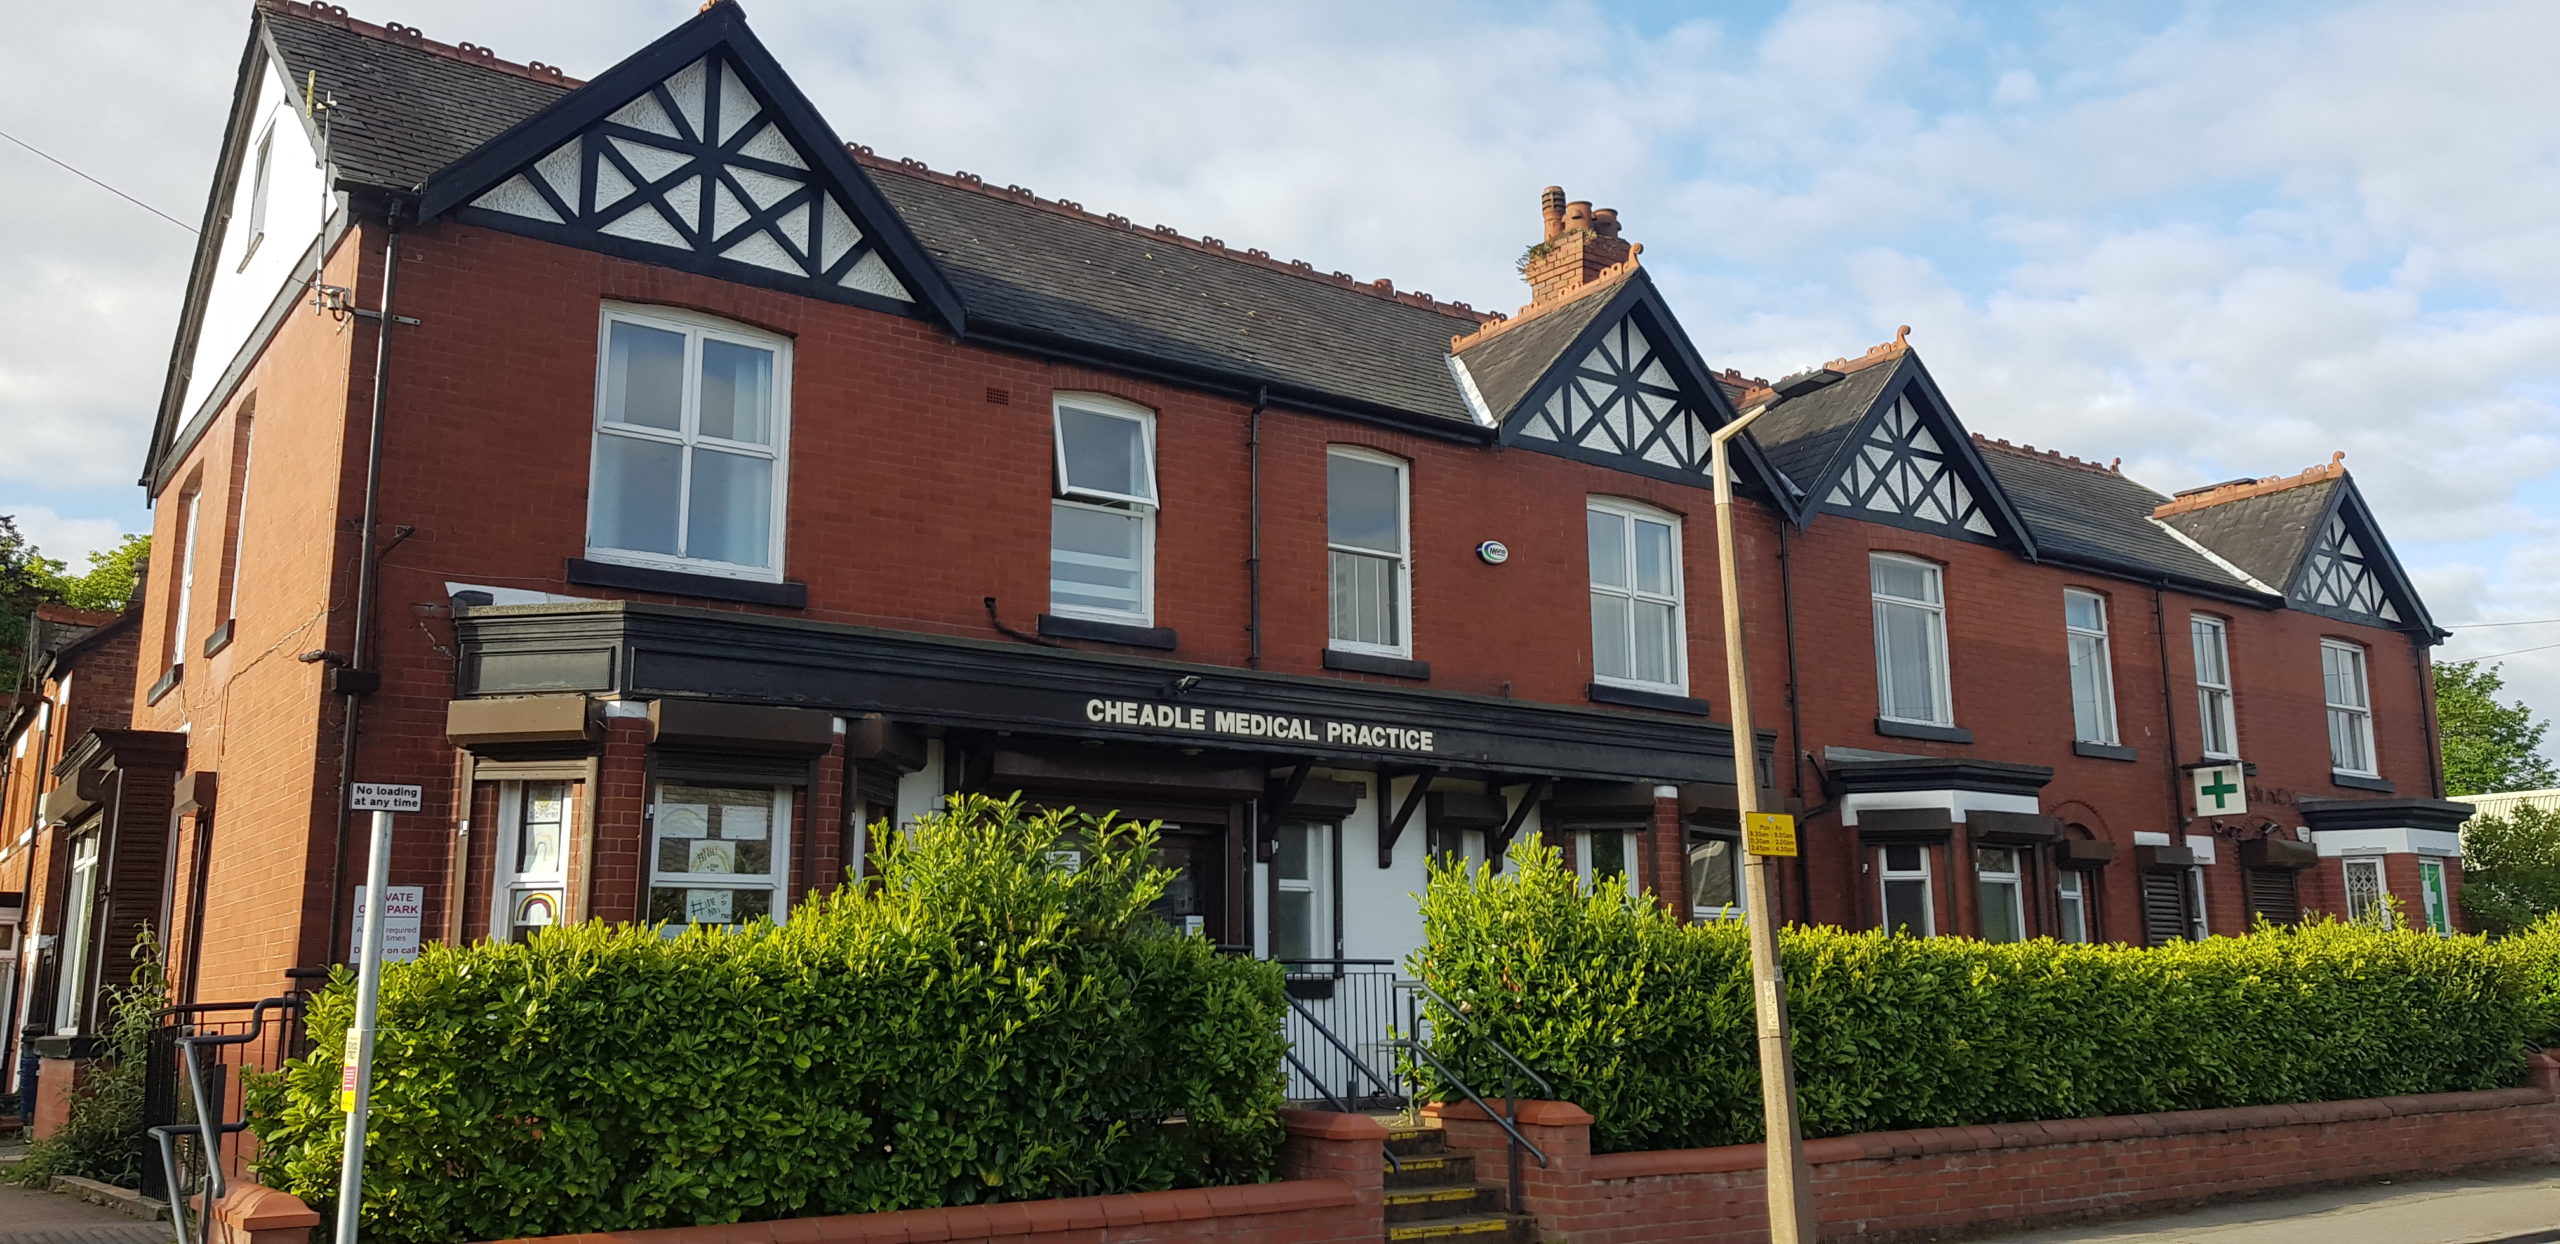 Cheadle Medical Practice